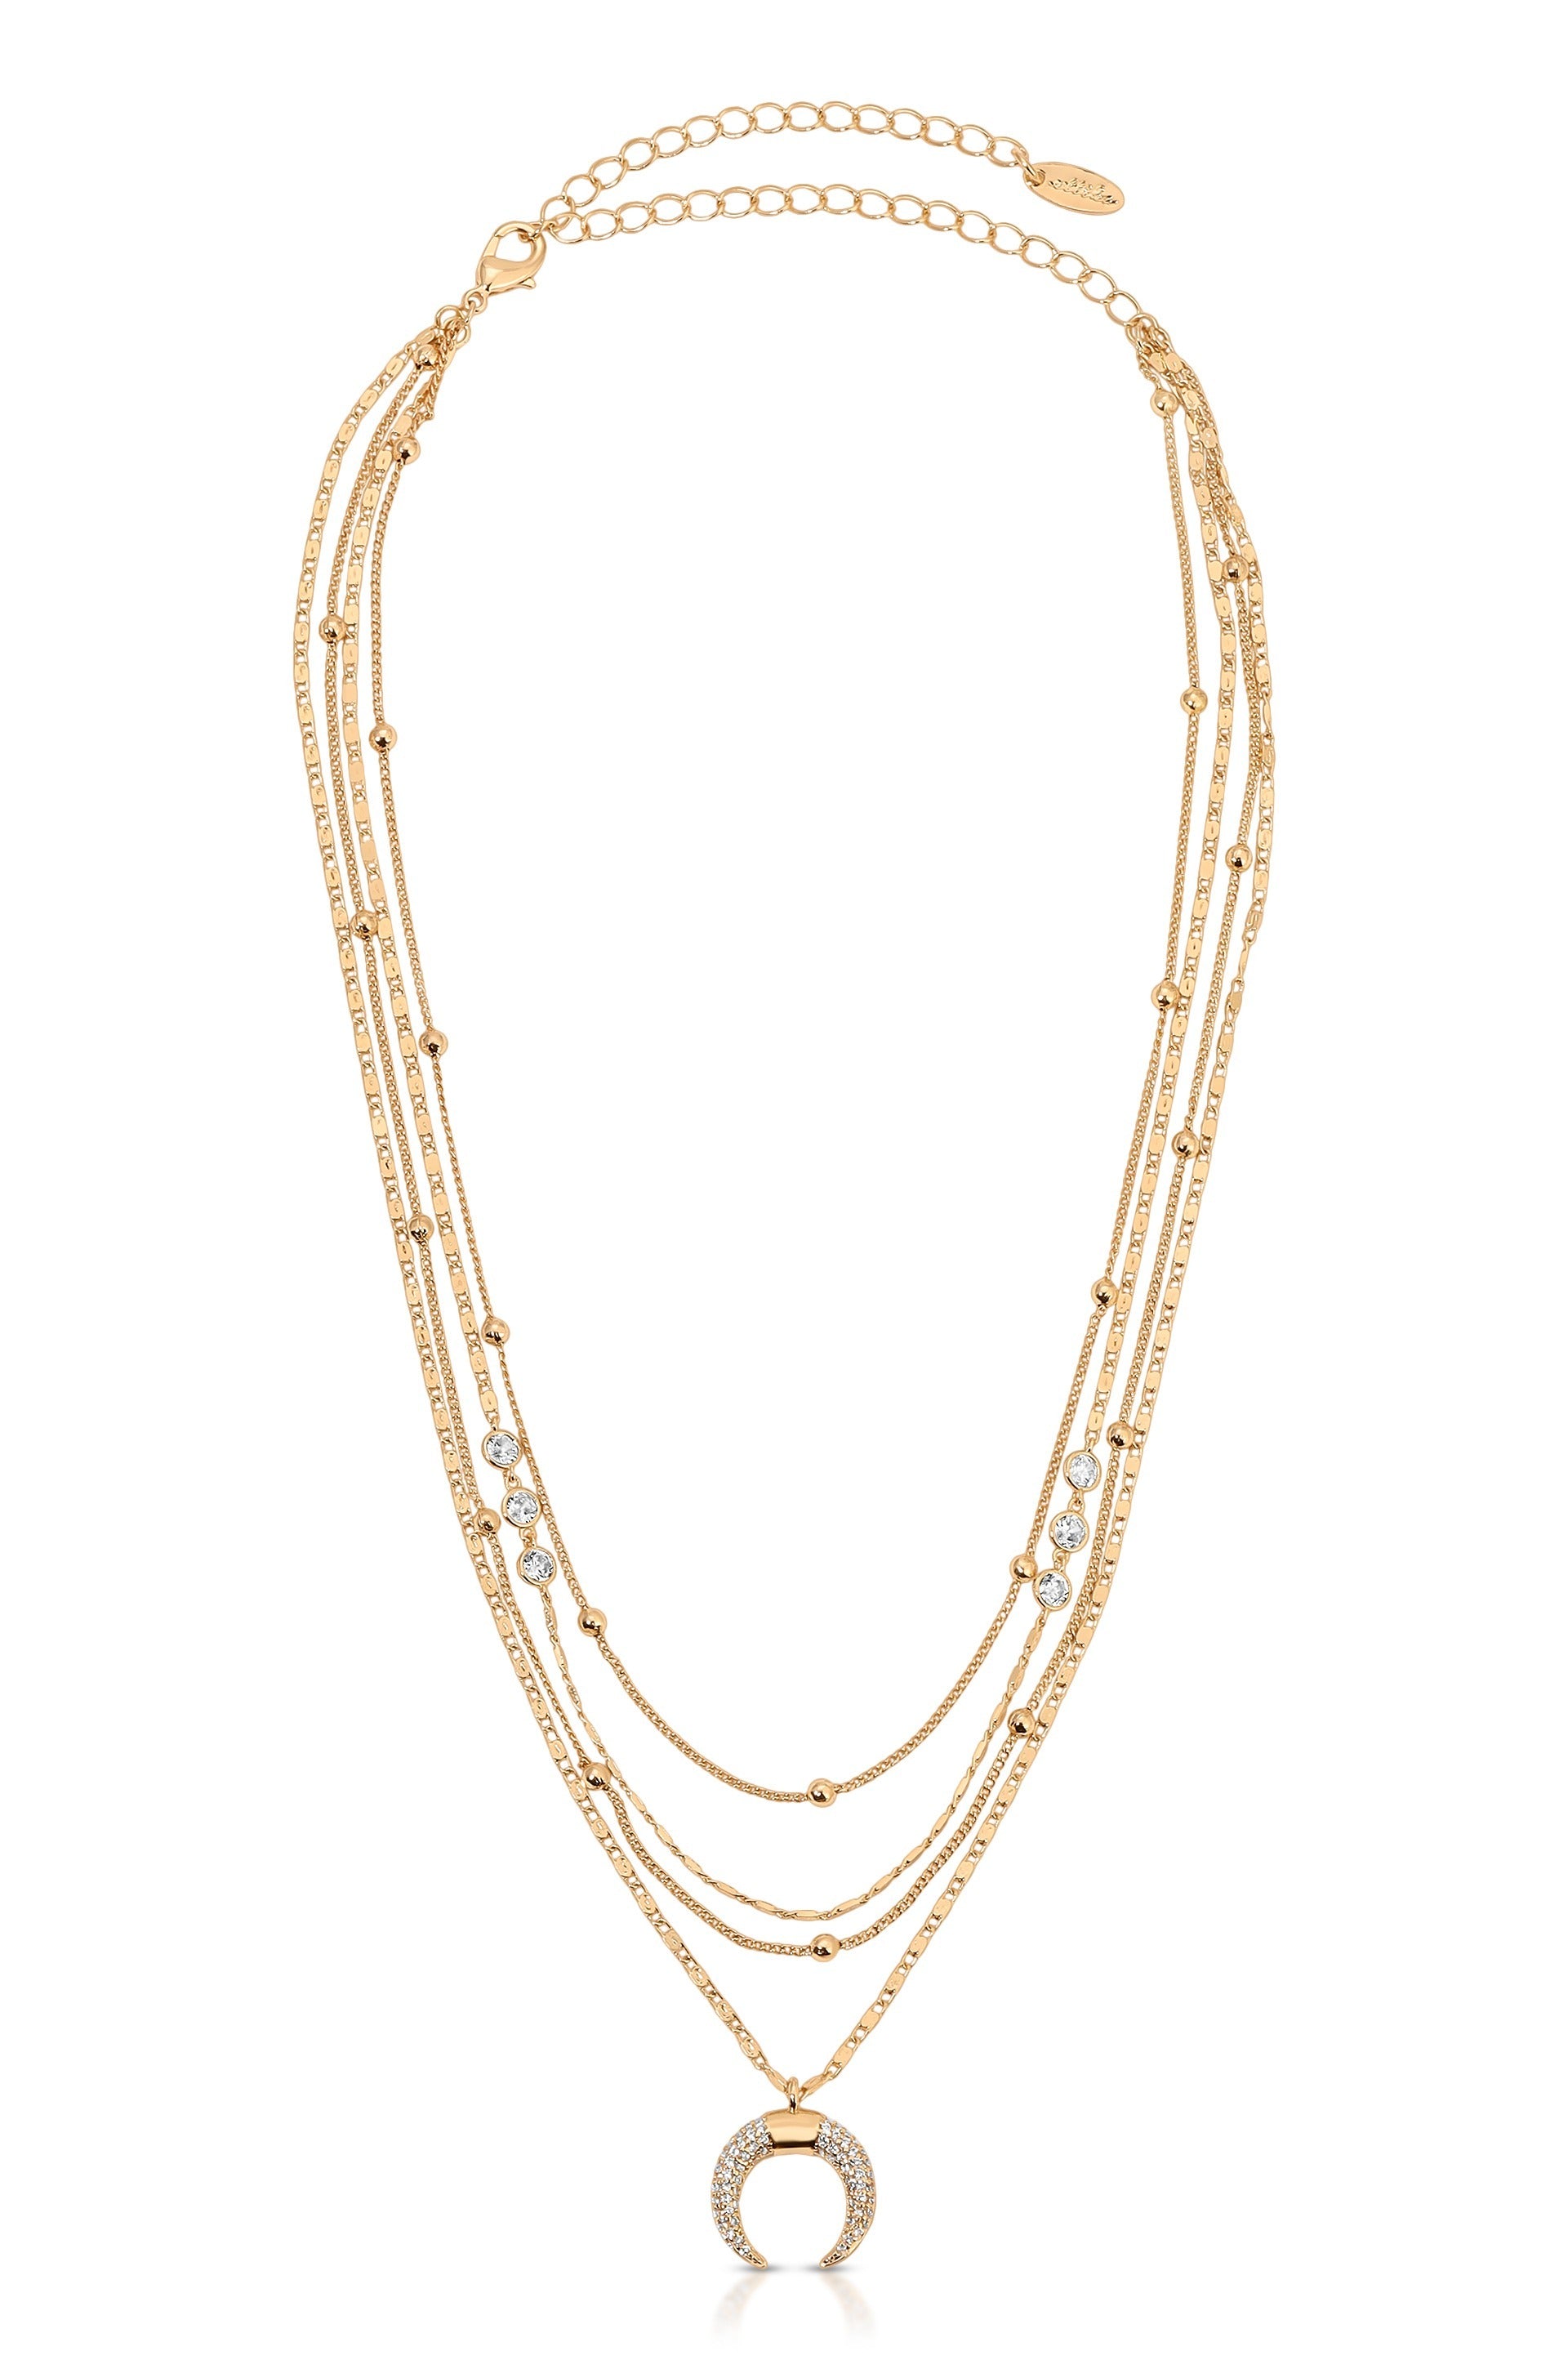 Layered Gold Chain & Crescent Horn Necklace full